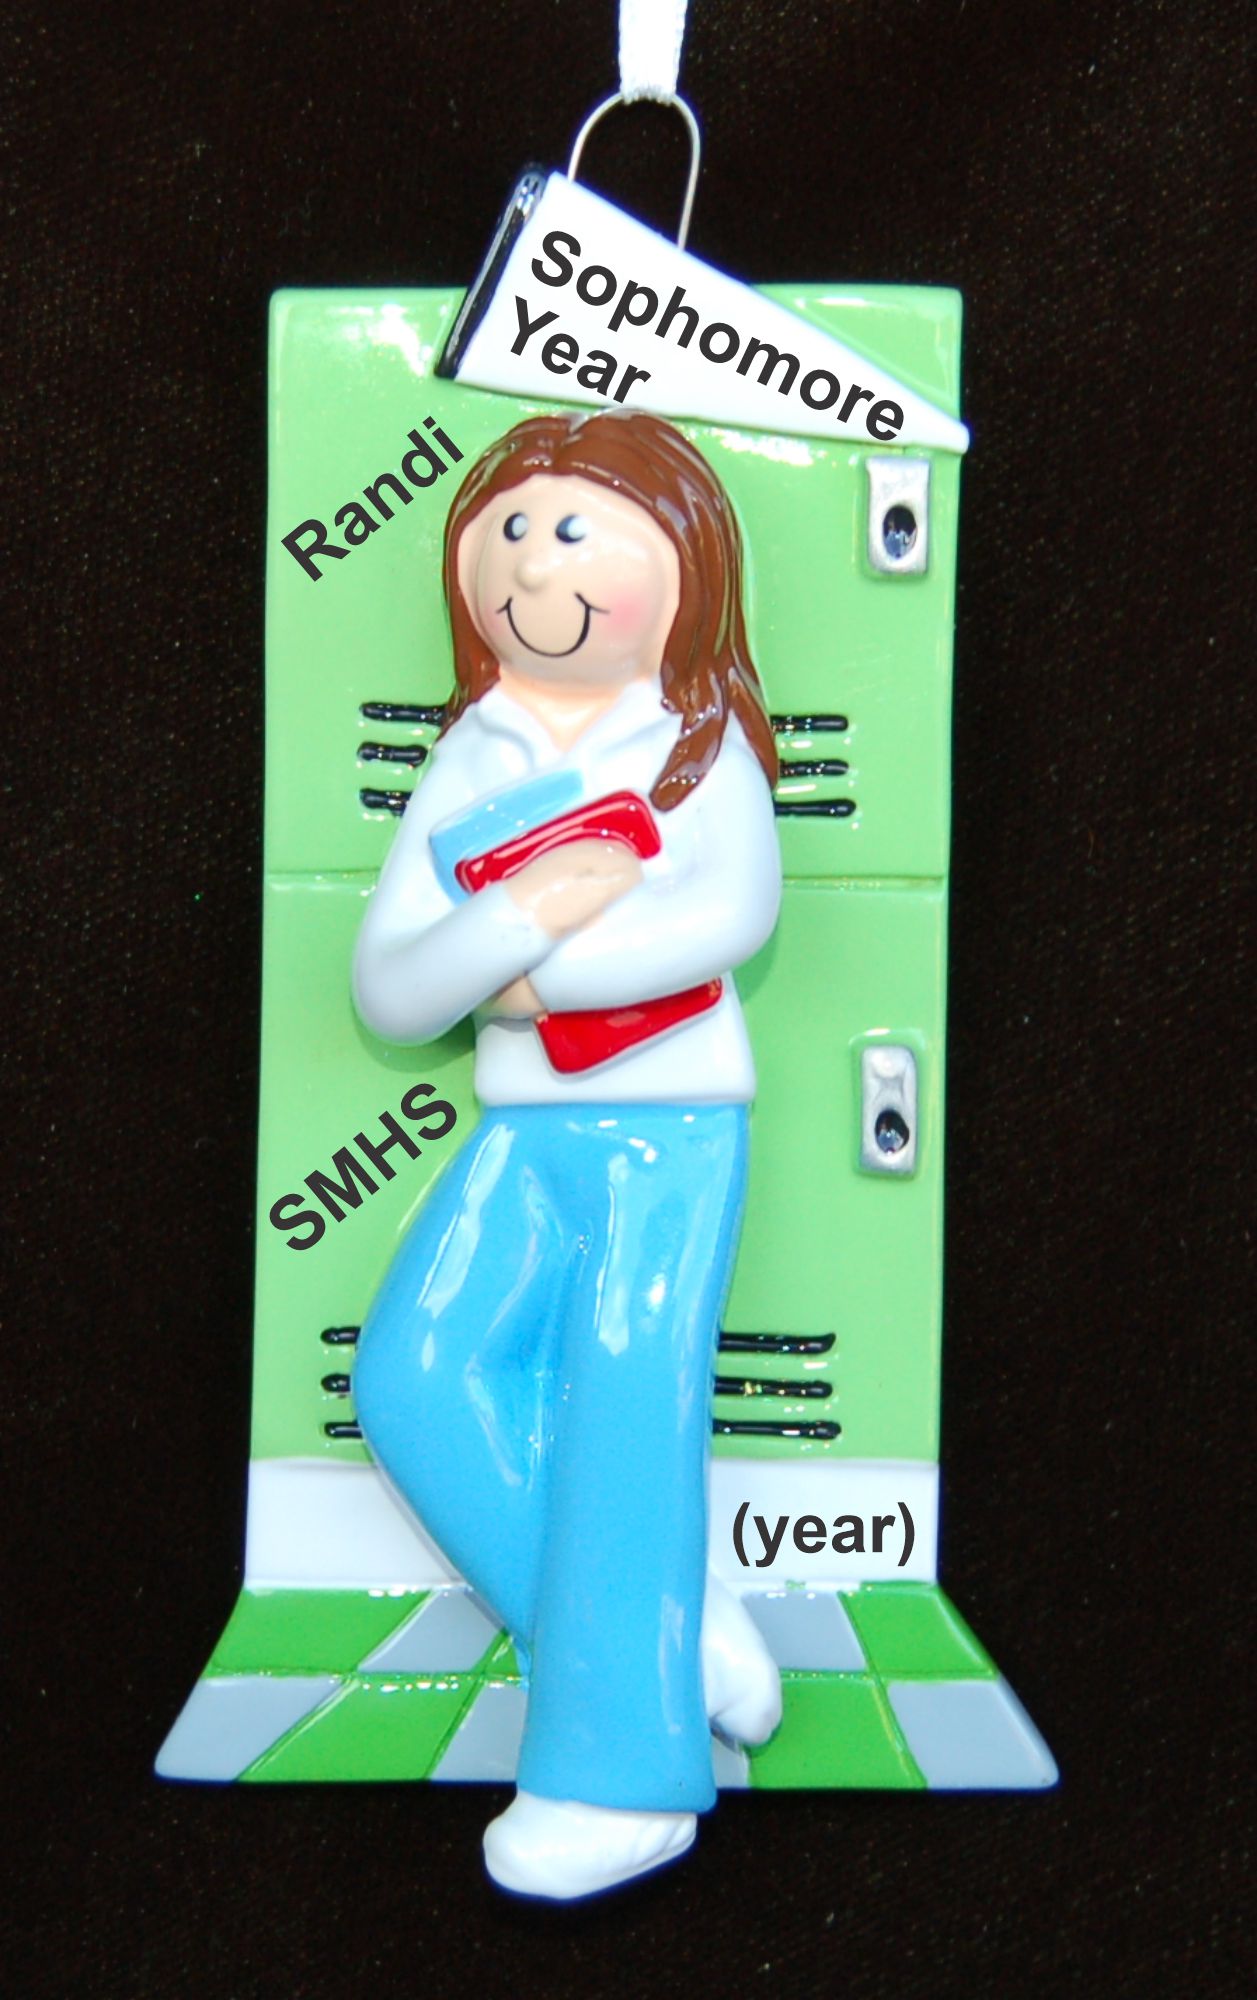 Sophomore Year High School Christmas Ornament Female Brunette Personalized by RussellRhodes.com